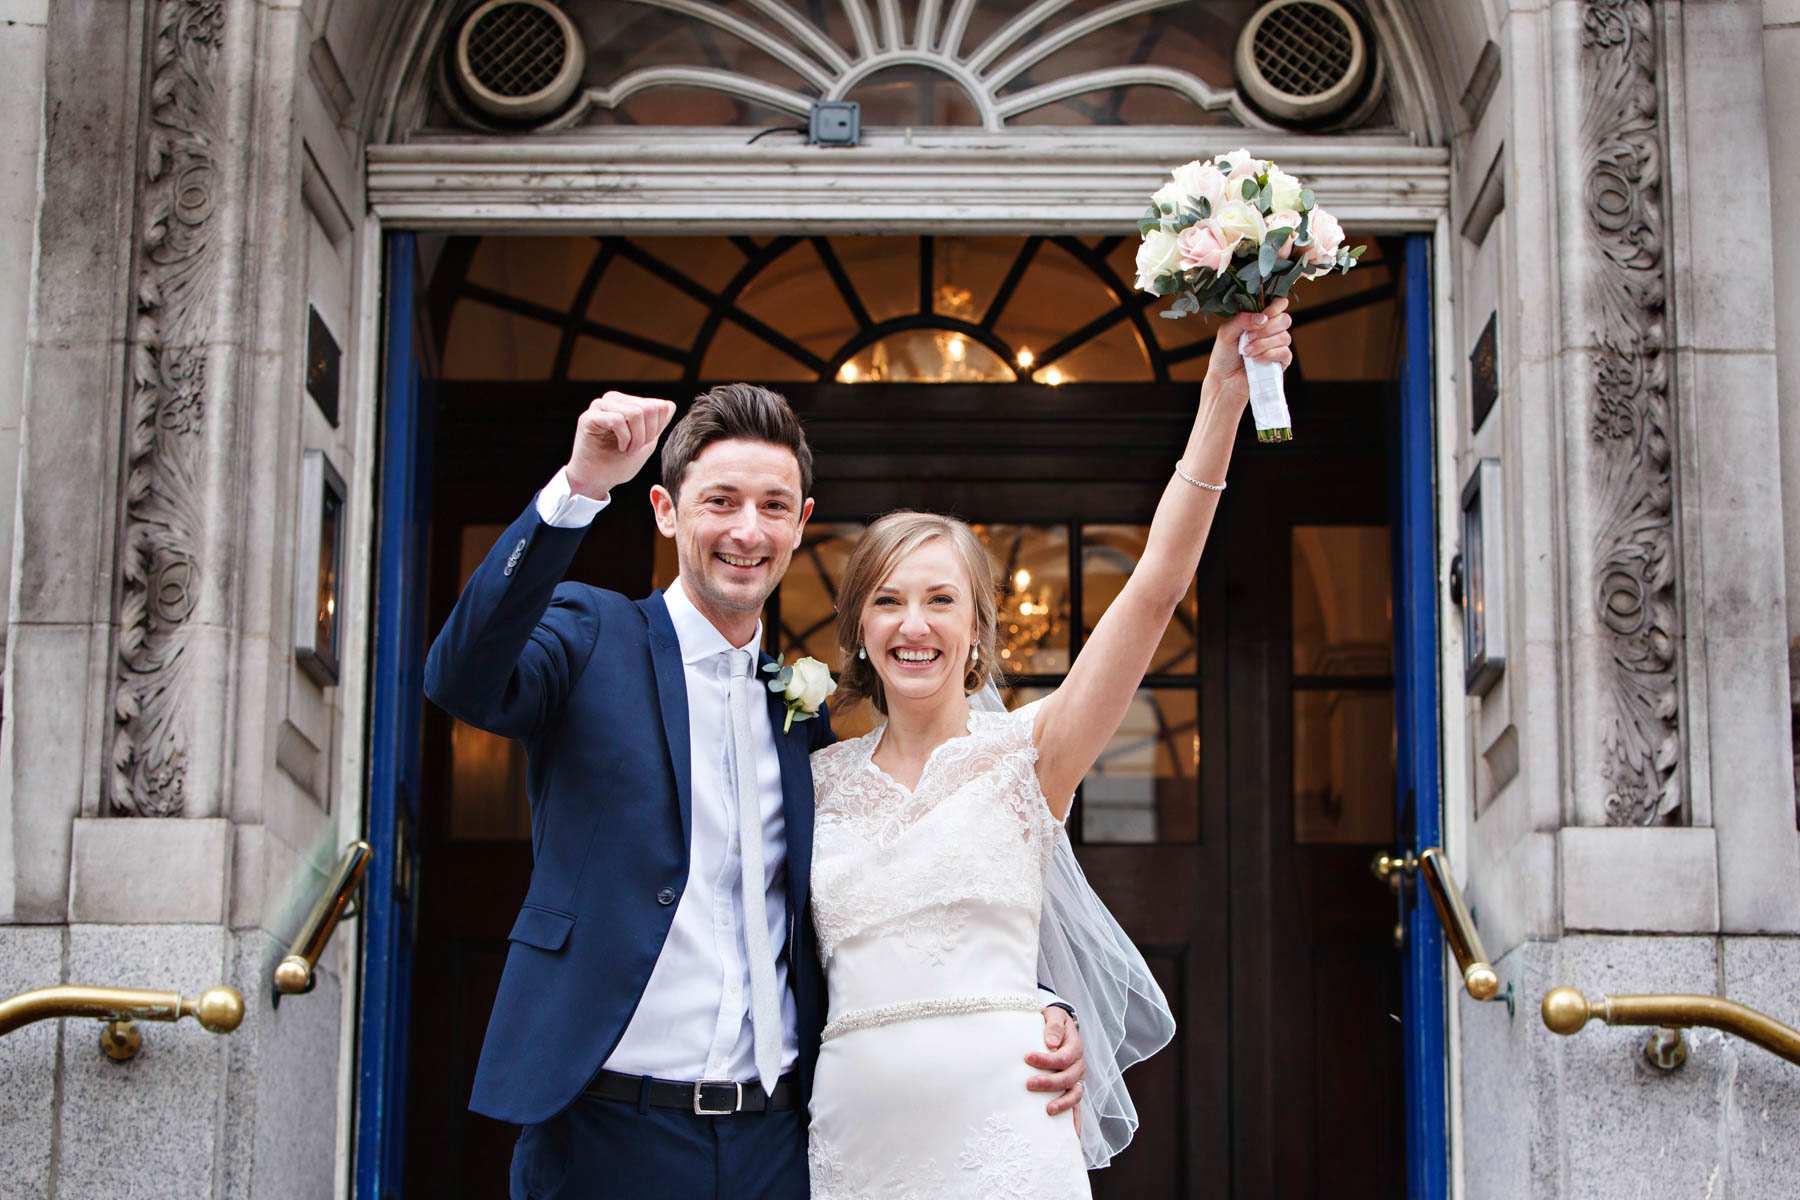 A bride and groom wave their arms in the air cheering to celebrate getting married at Chelsea Old Town Hall.